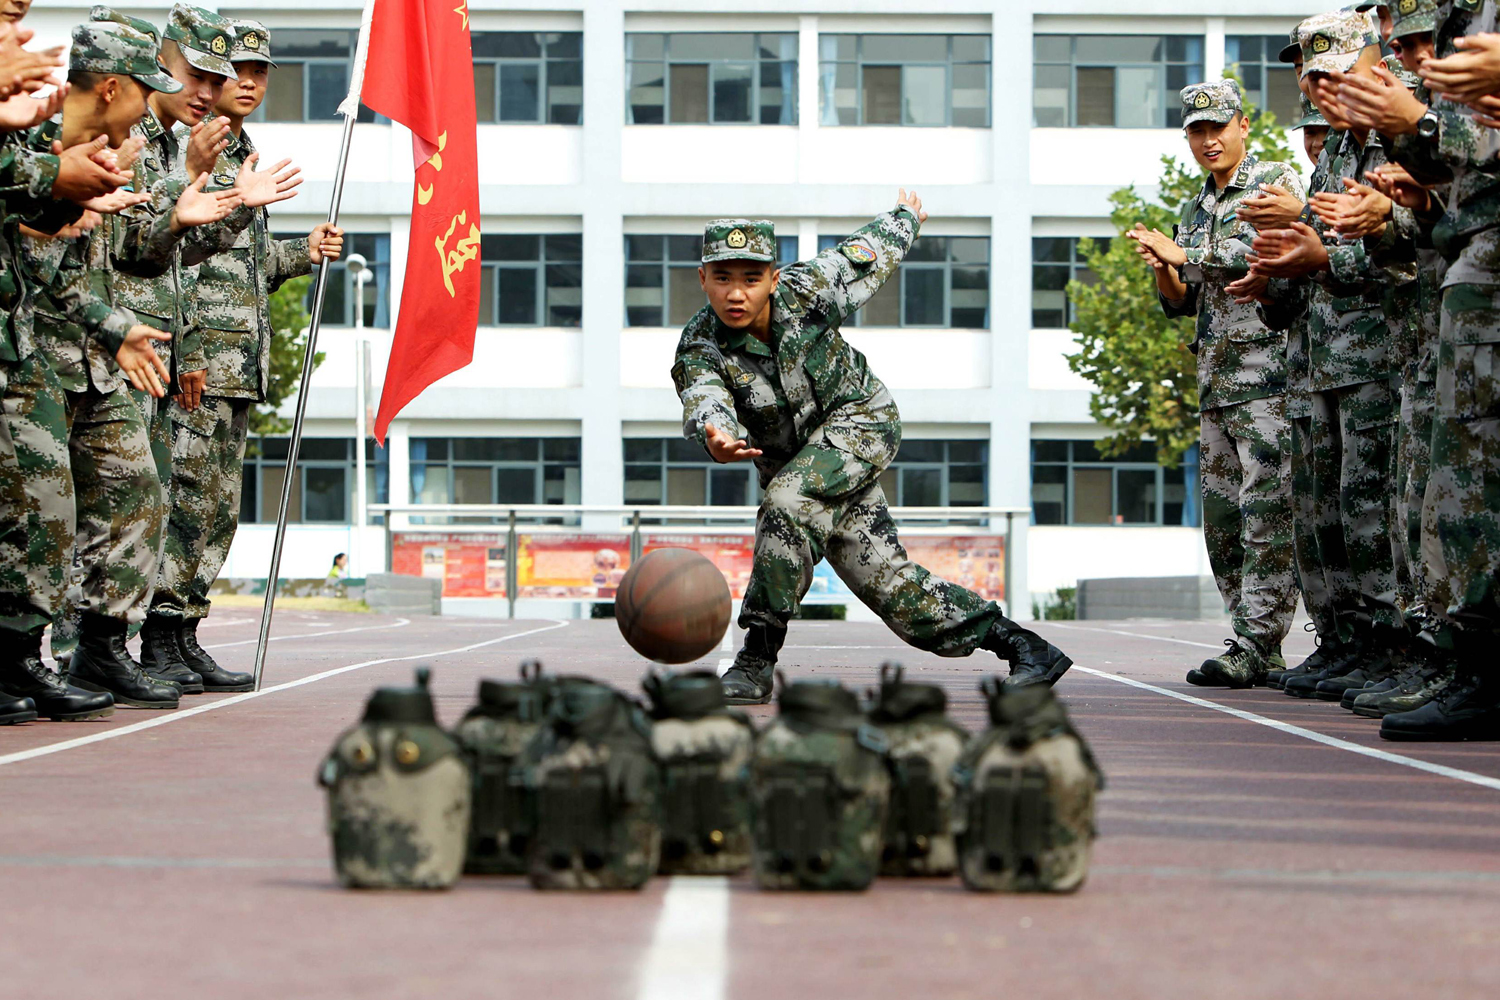 Oct.3, 2013. Soldiers of Chinese People's Liberation Army  bowl  during China's seven-day National Day holiday in Jinan, Shandong province.